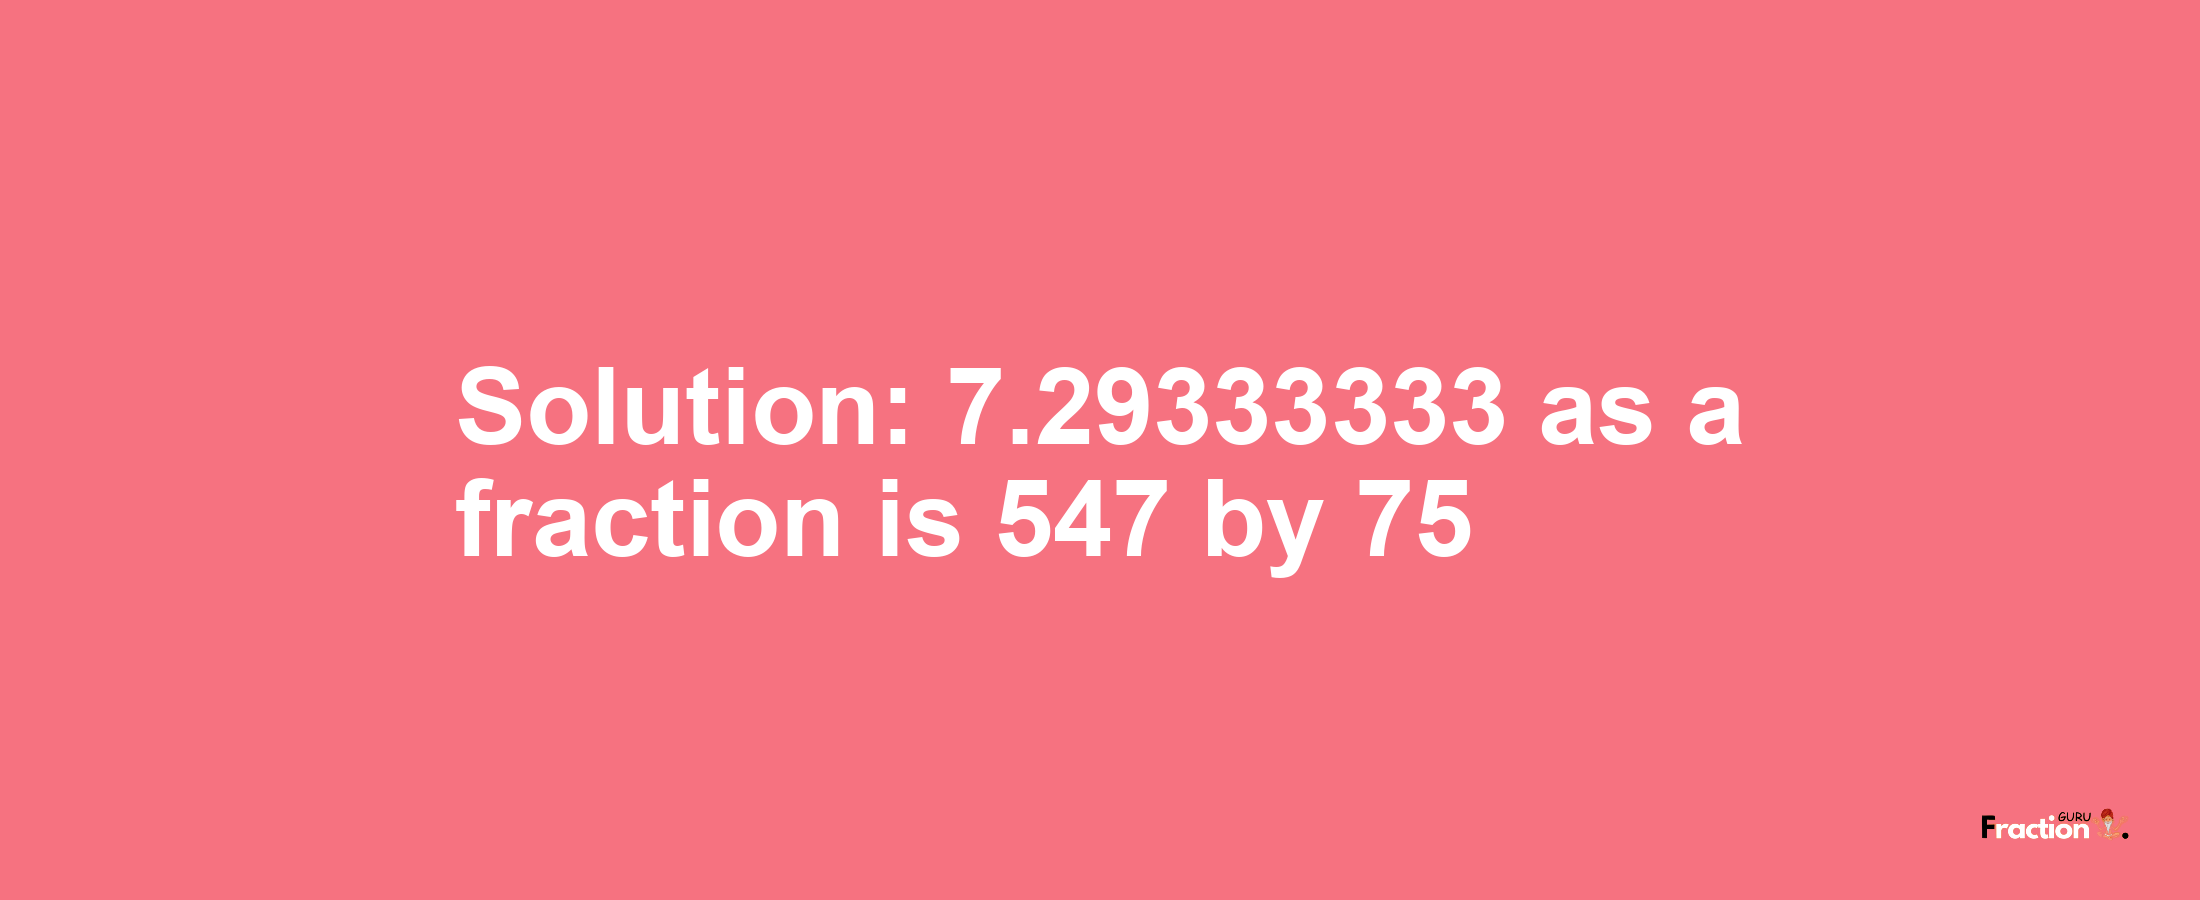 Solution:7.29333333 as a fraction is 547/75